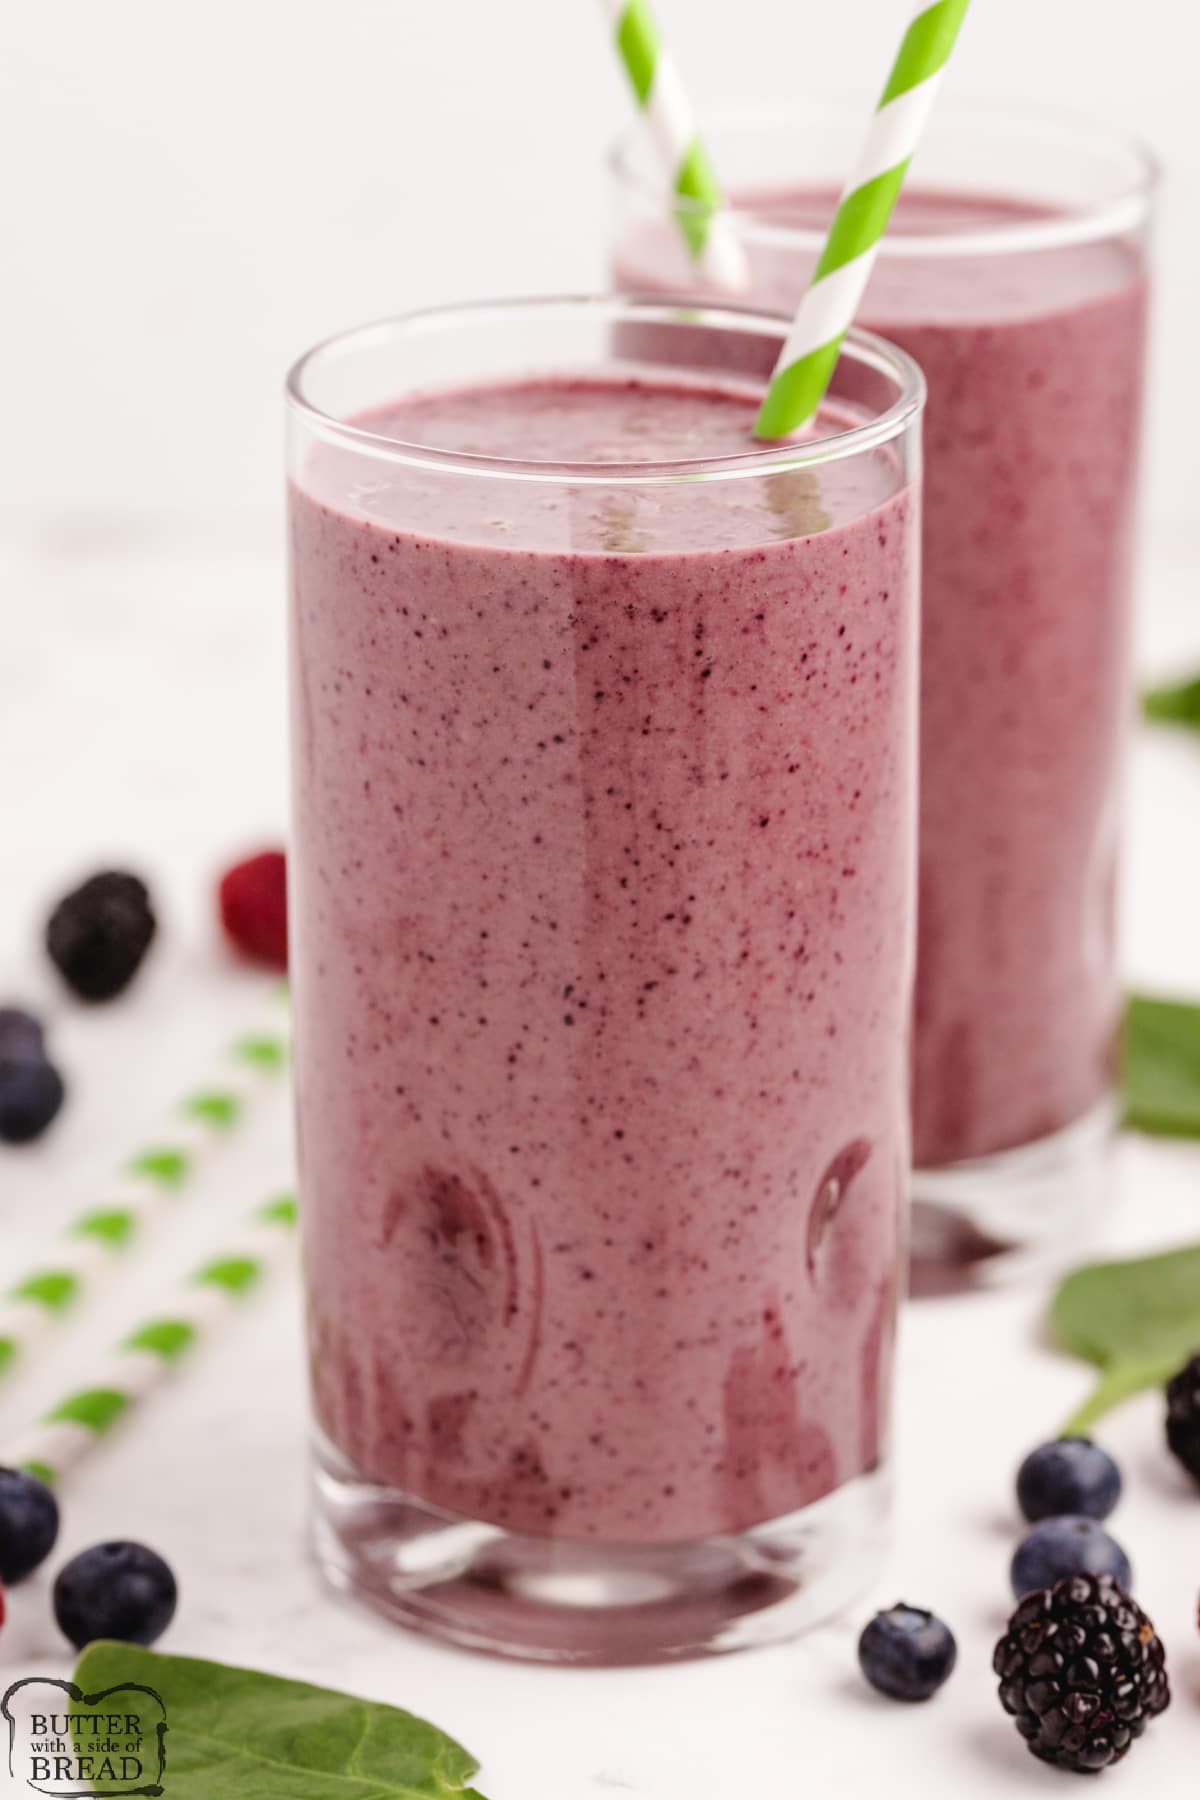 Triple Berry Green Smoothies made with 4 ingredients in less than 2 minutes. Easy smoothie recipe that is so pretty and purple, no one will ever know there is spinach in there! 